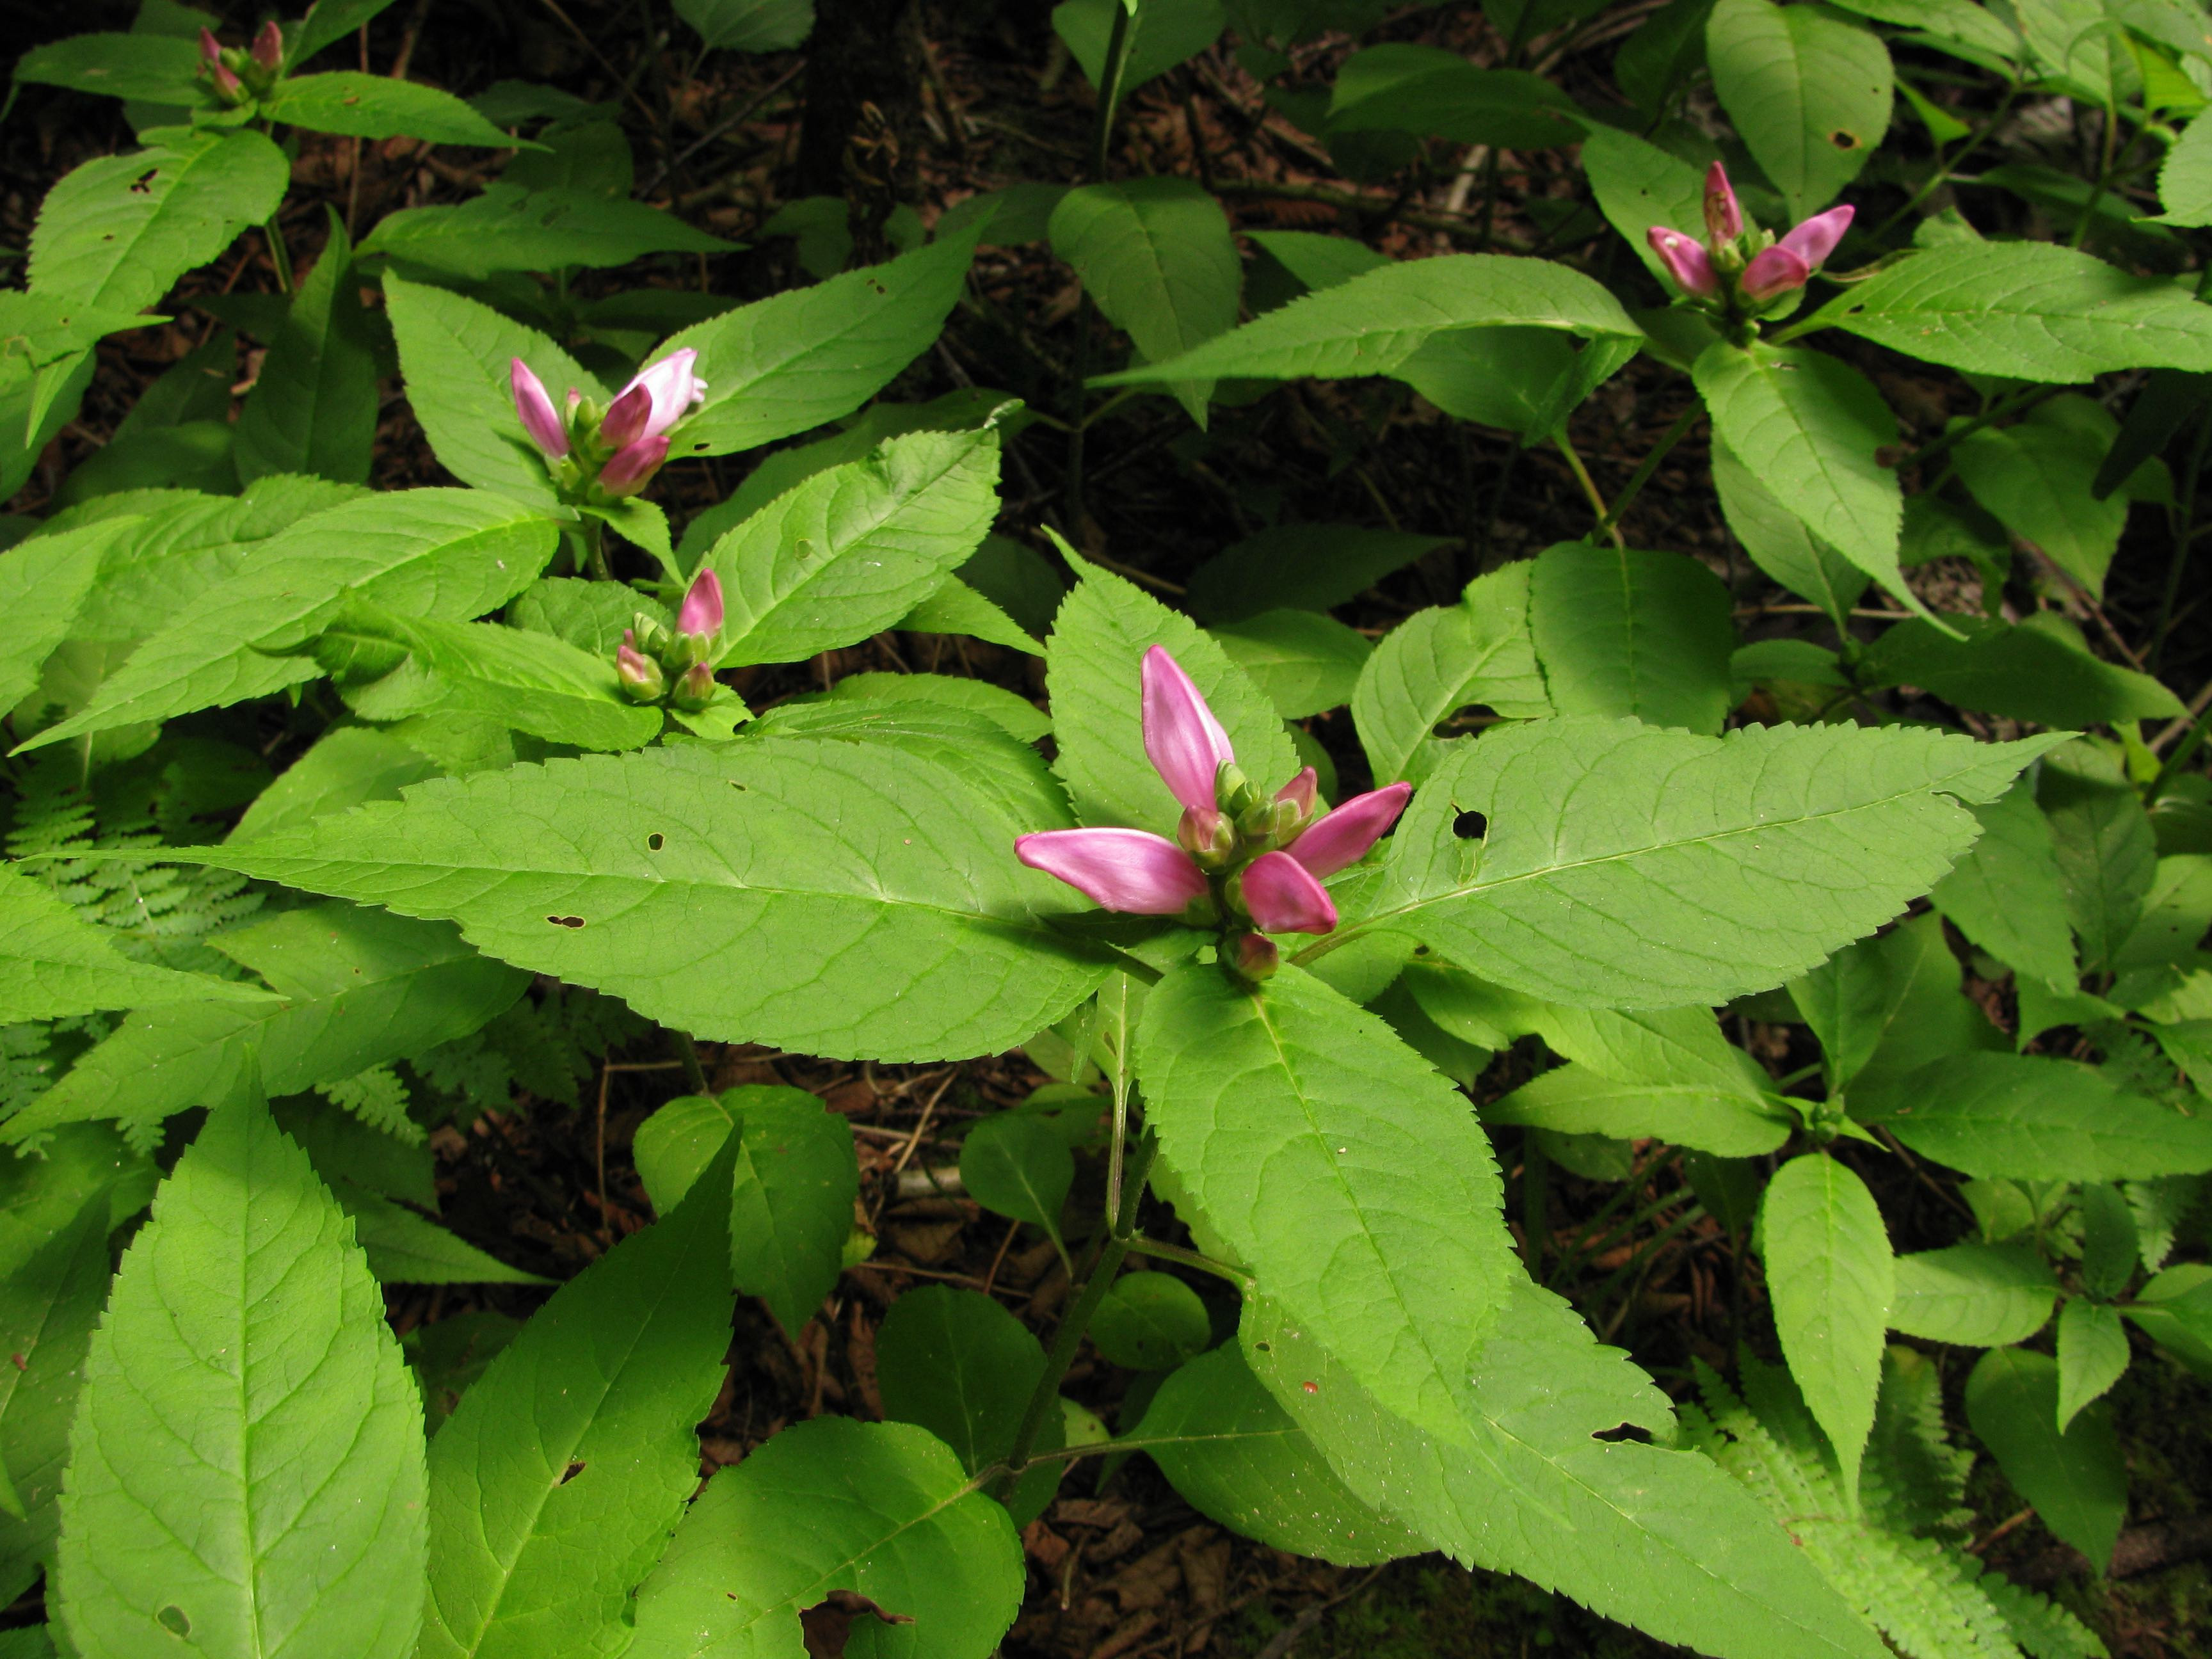 The Scientific Name is Chelone lyonii. You will likely hear them called Turtlehead. This picture shows the Colony of Pink Turtlehead of Chelone lyonii